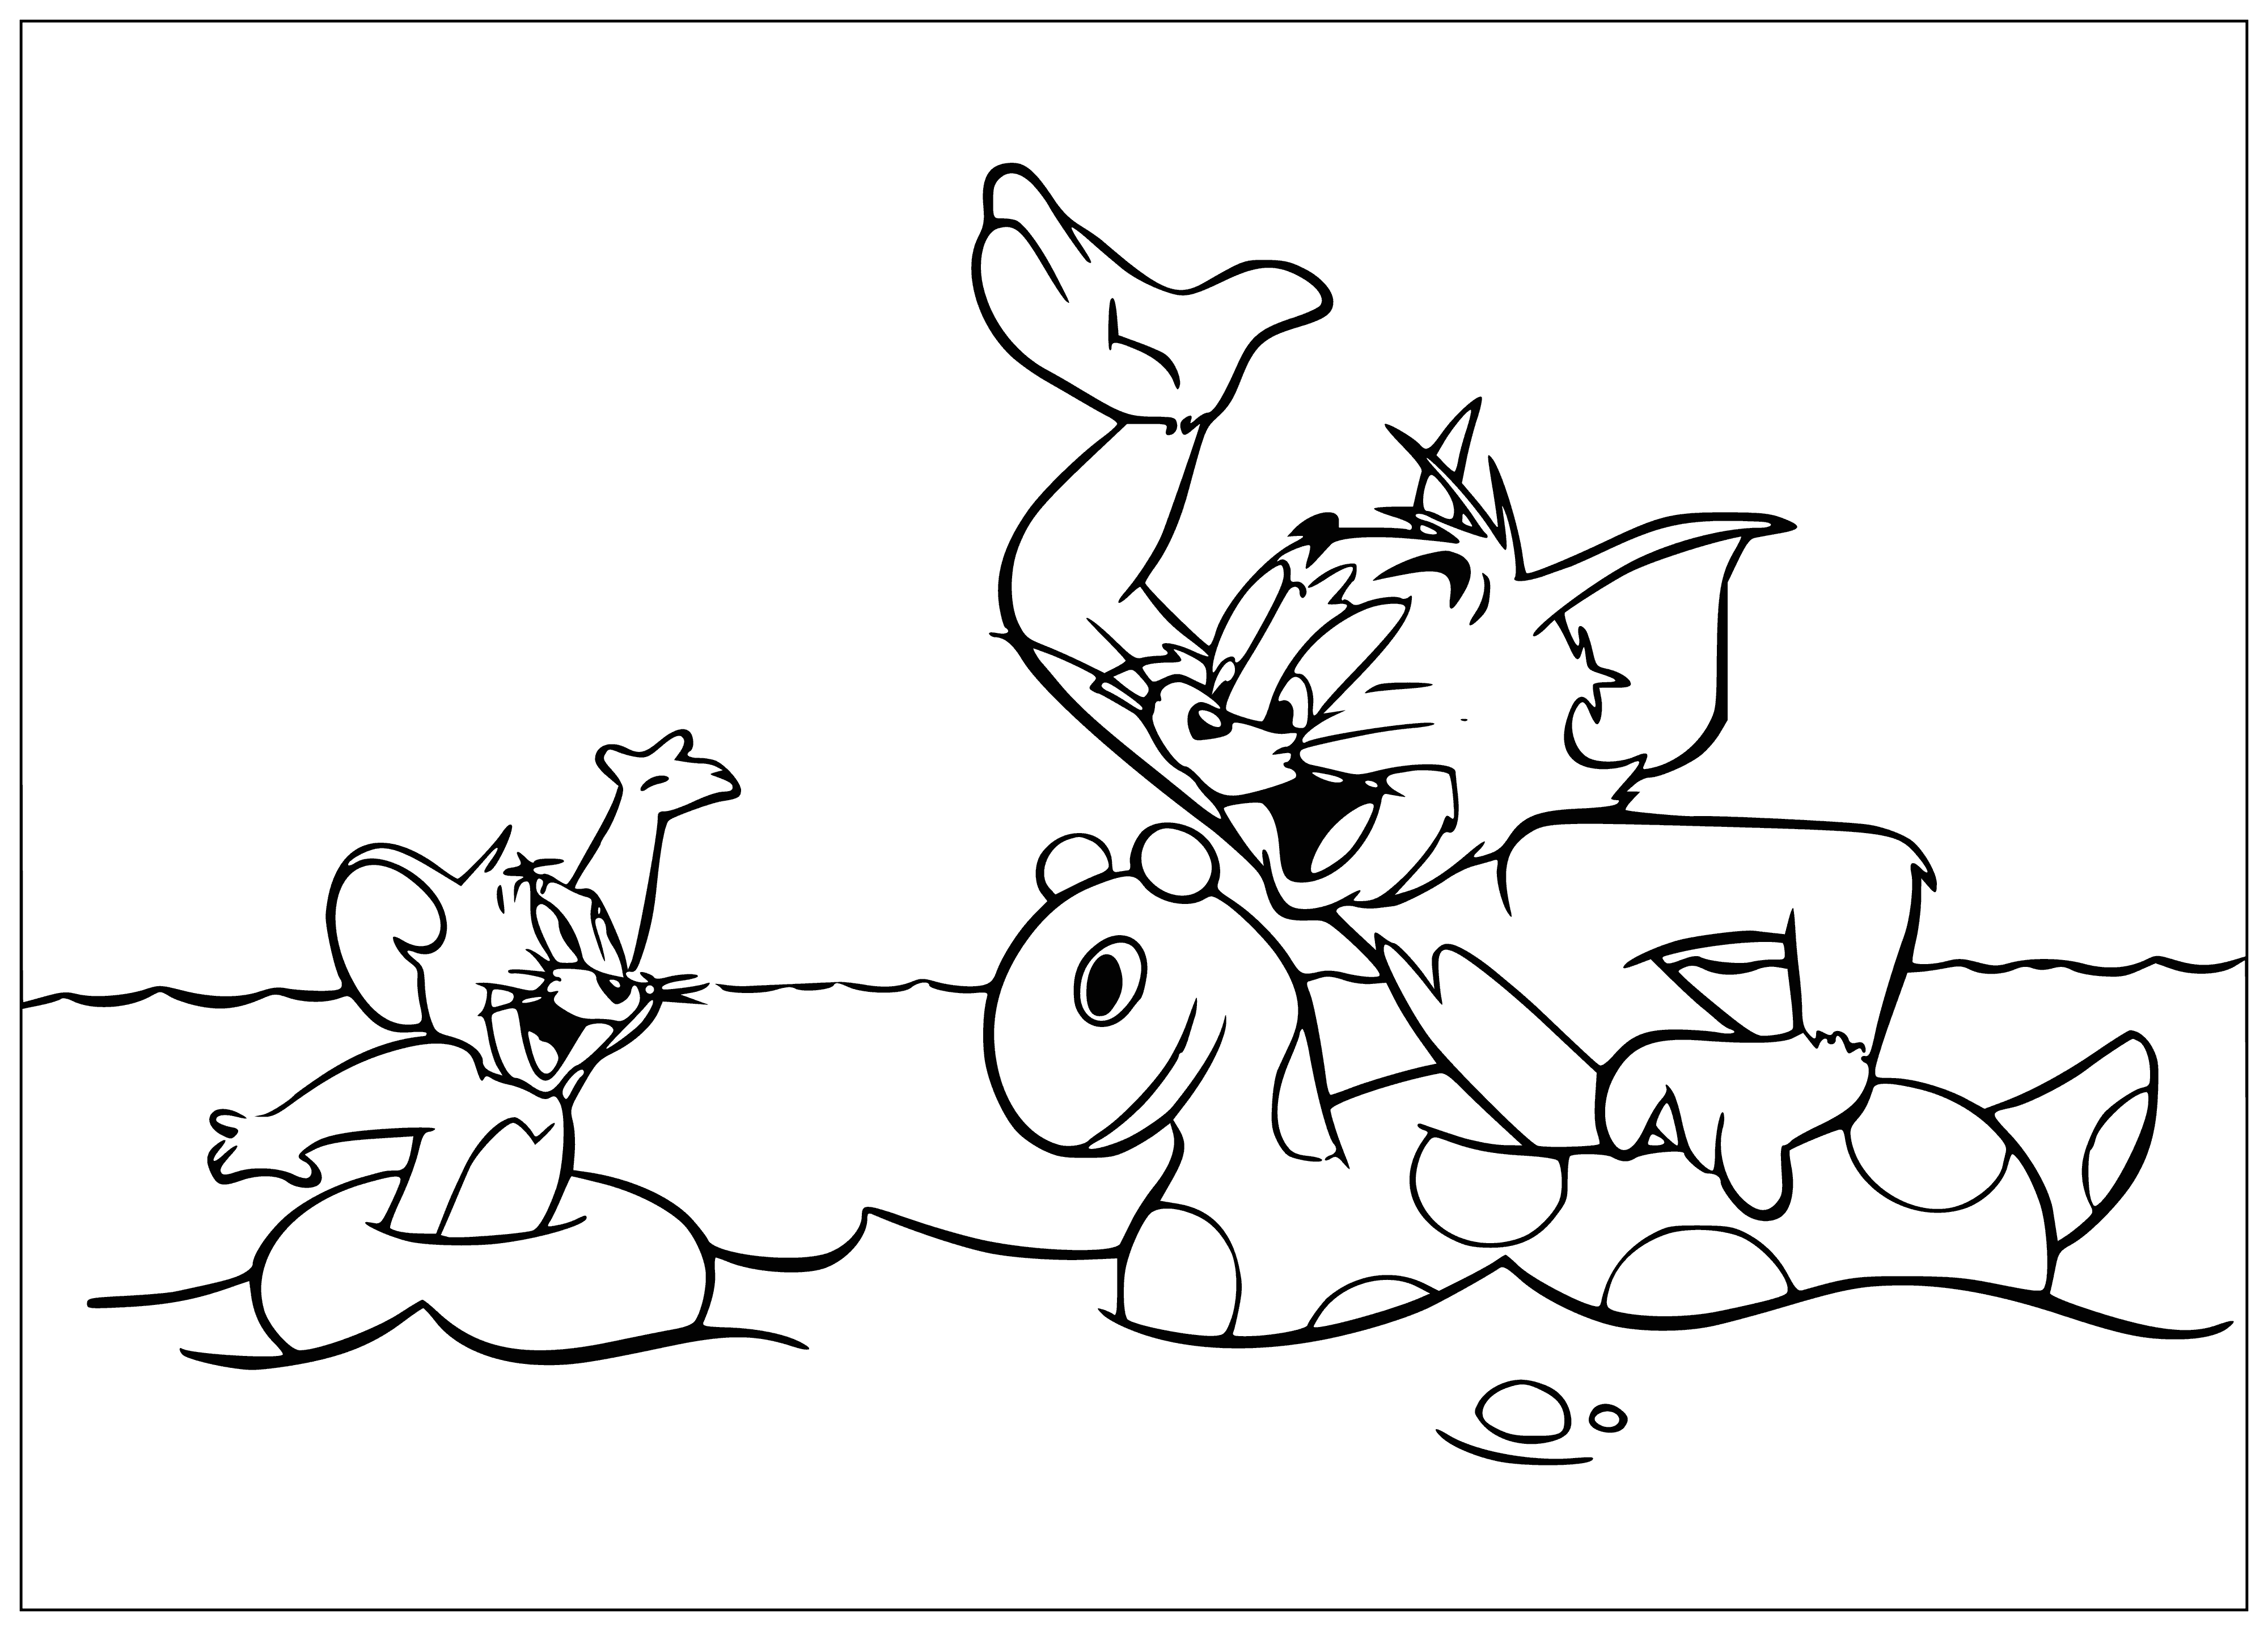 coloring page: Tom chases Jerry for the cheese.